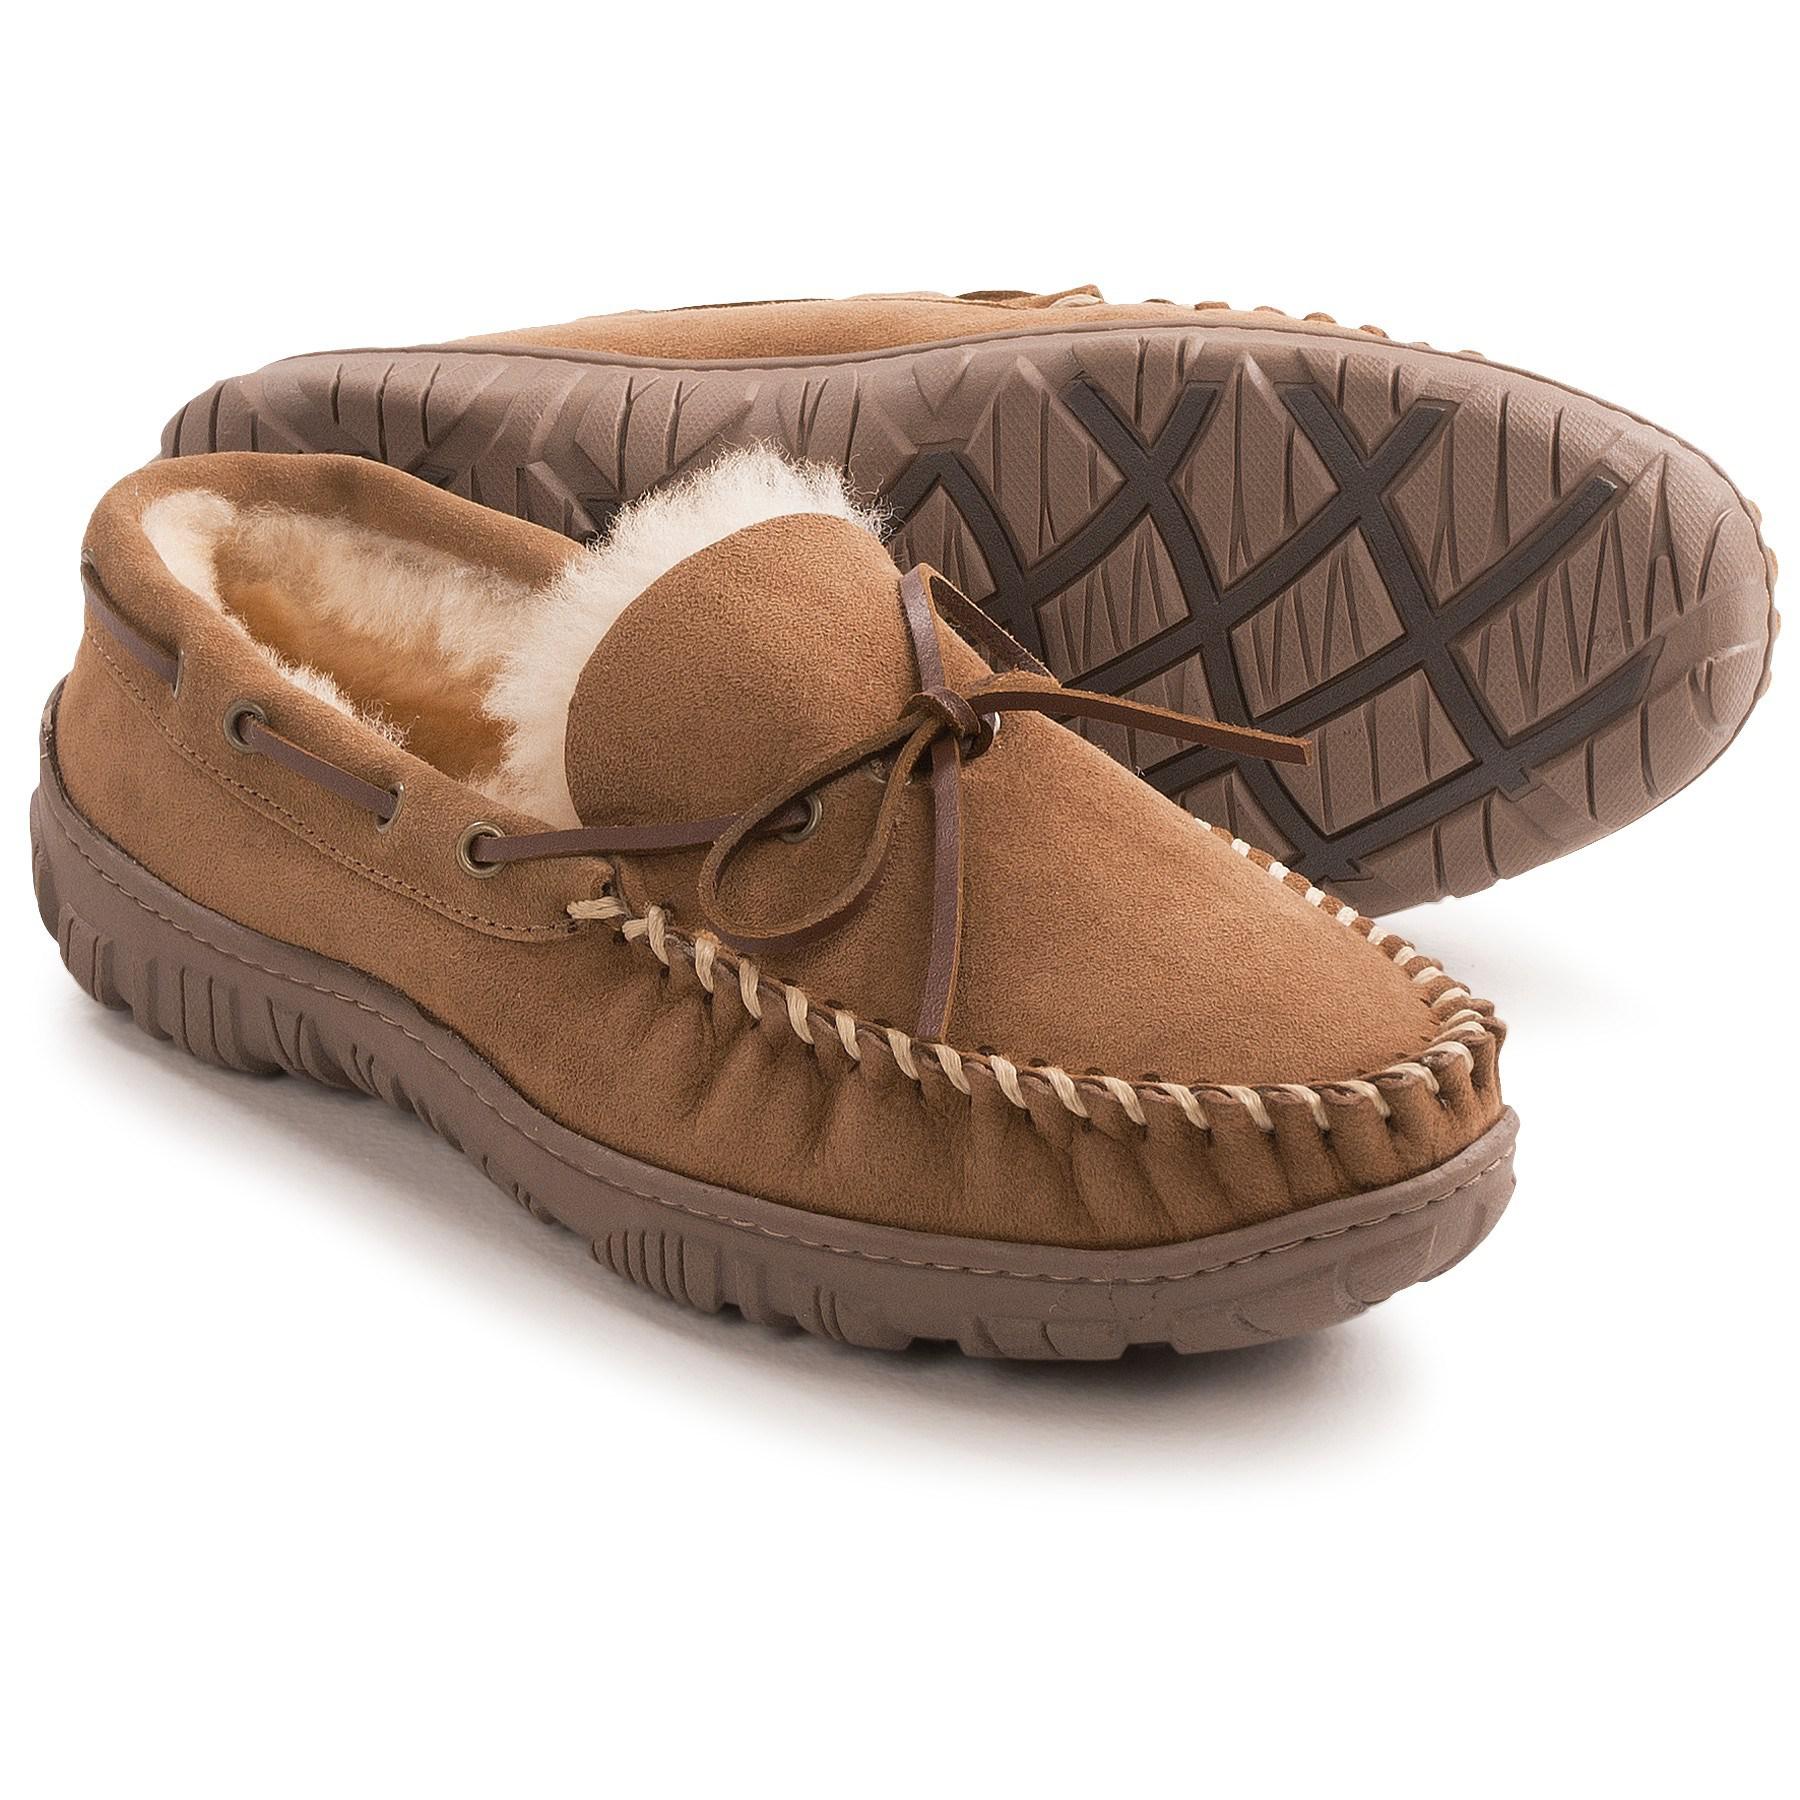 Clarks Suede Moc Shearling Slippers (for Men) in Brown for Men - Lyst